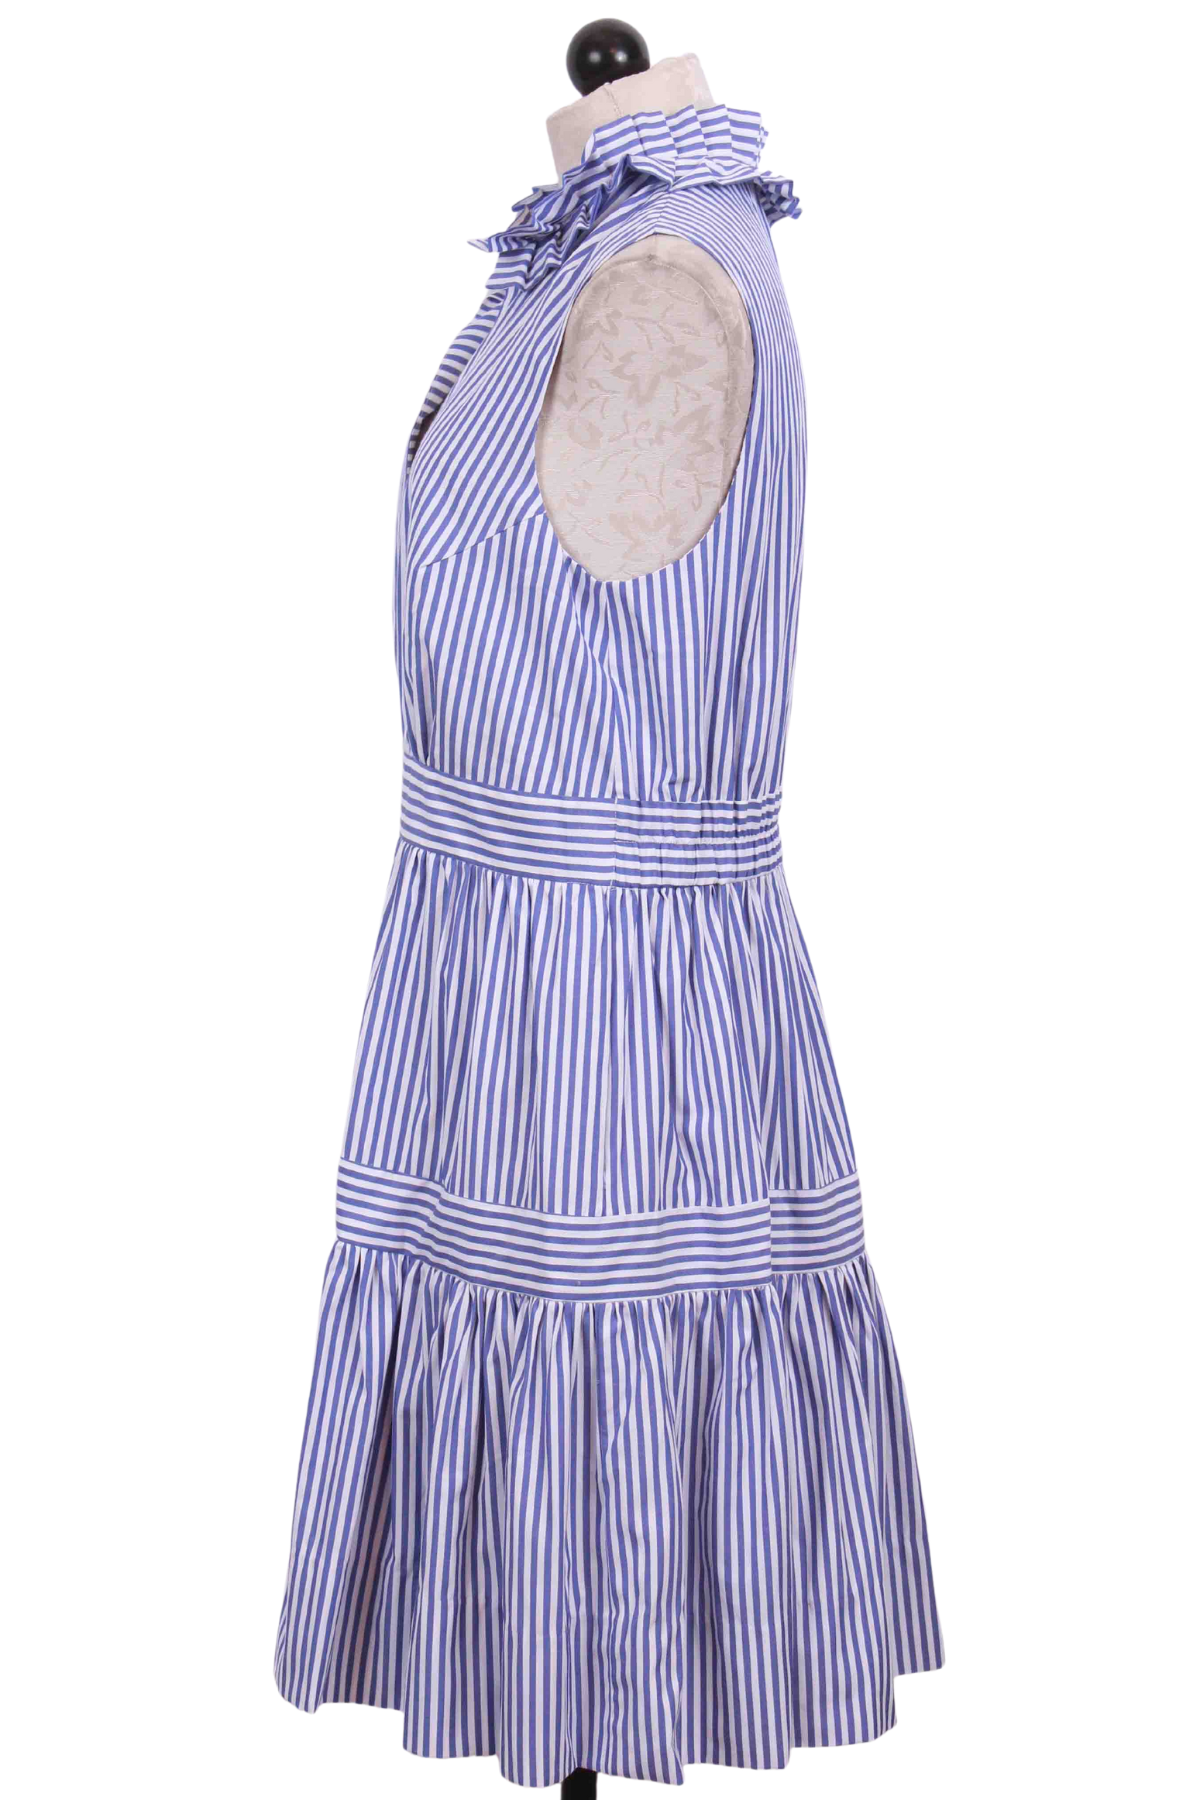 side view of  Navy and White Striped Short Hope Dress by Gretchen Scott